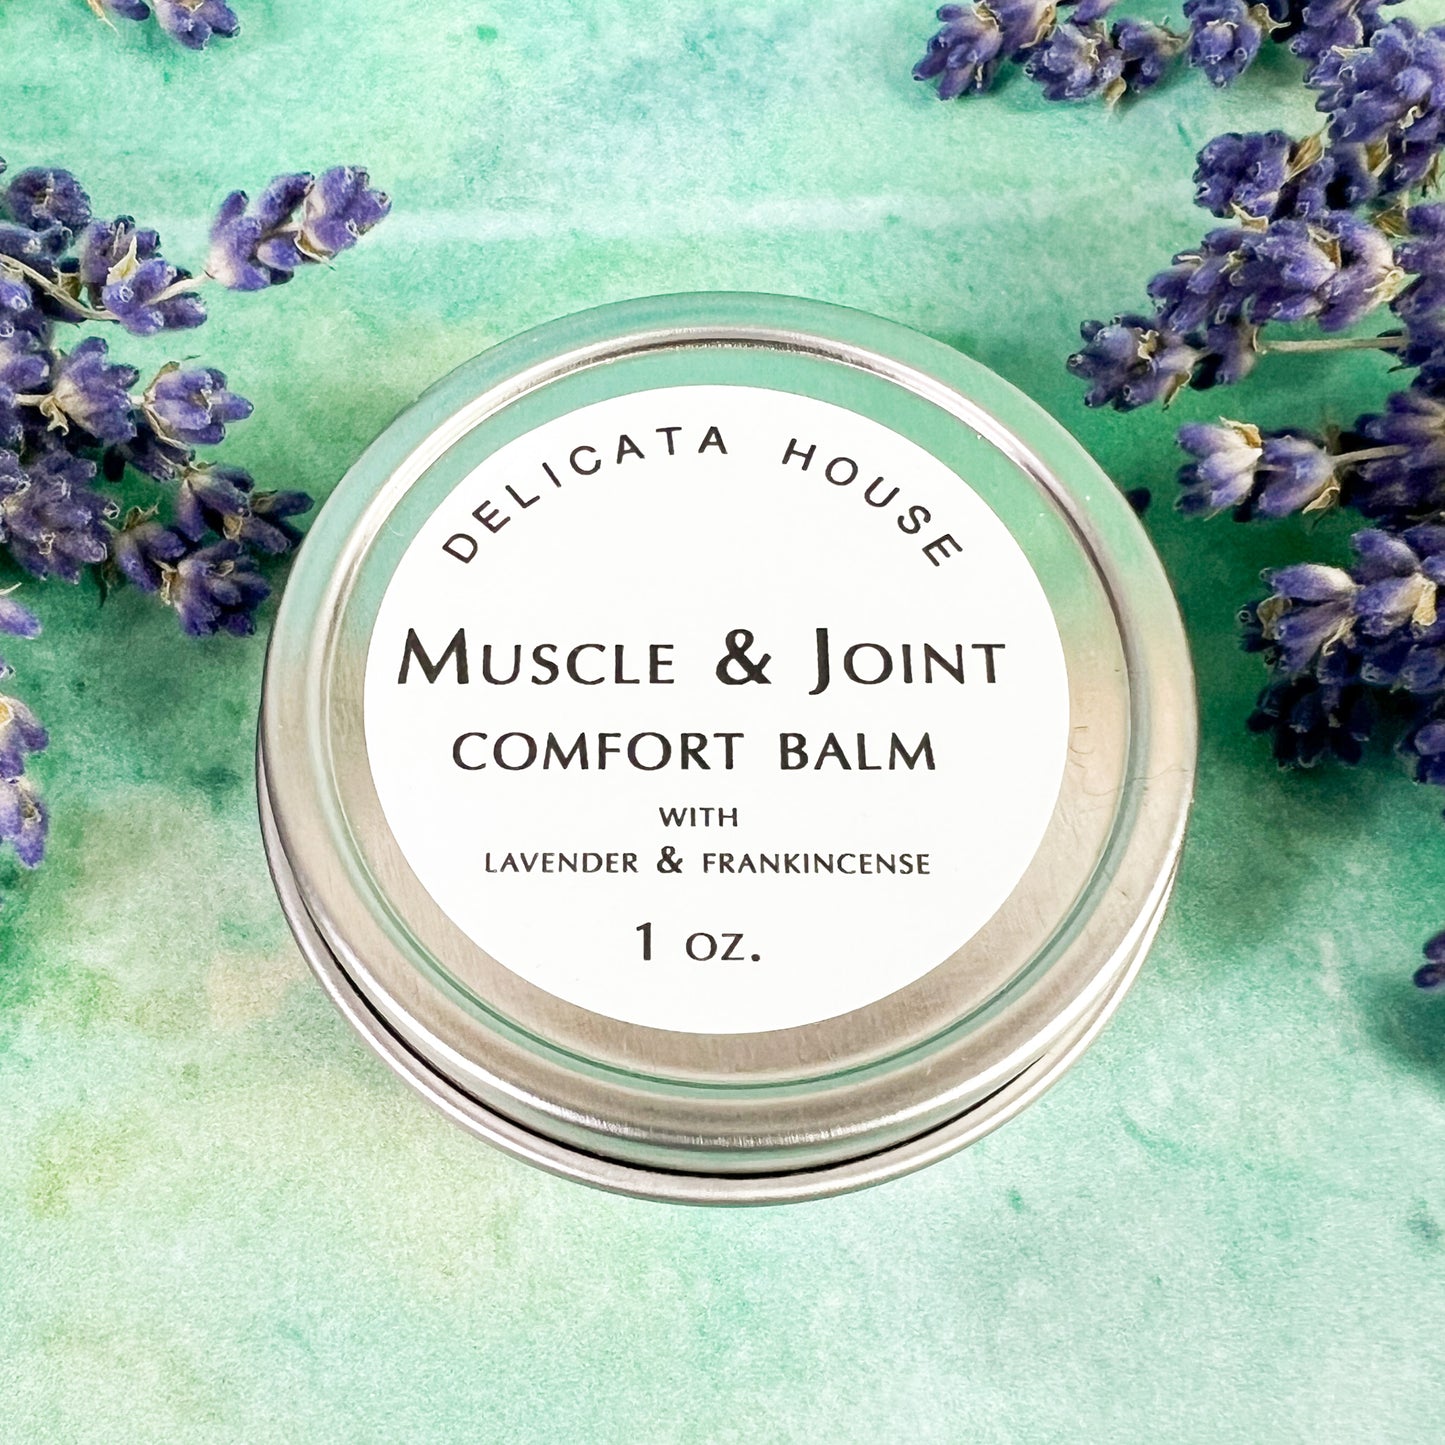 Muscle & Joint Comfort Balm 1 oz - Muscle Rub - Pain Relief Balm - Sore Muscle Rub - Joint Balm